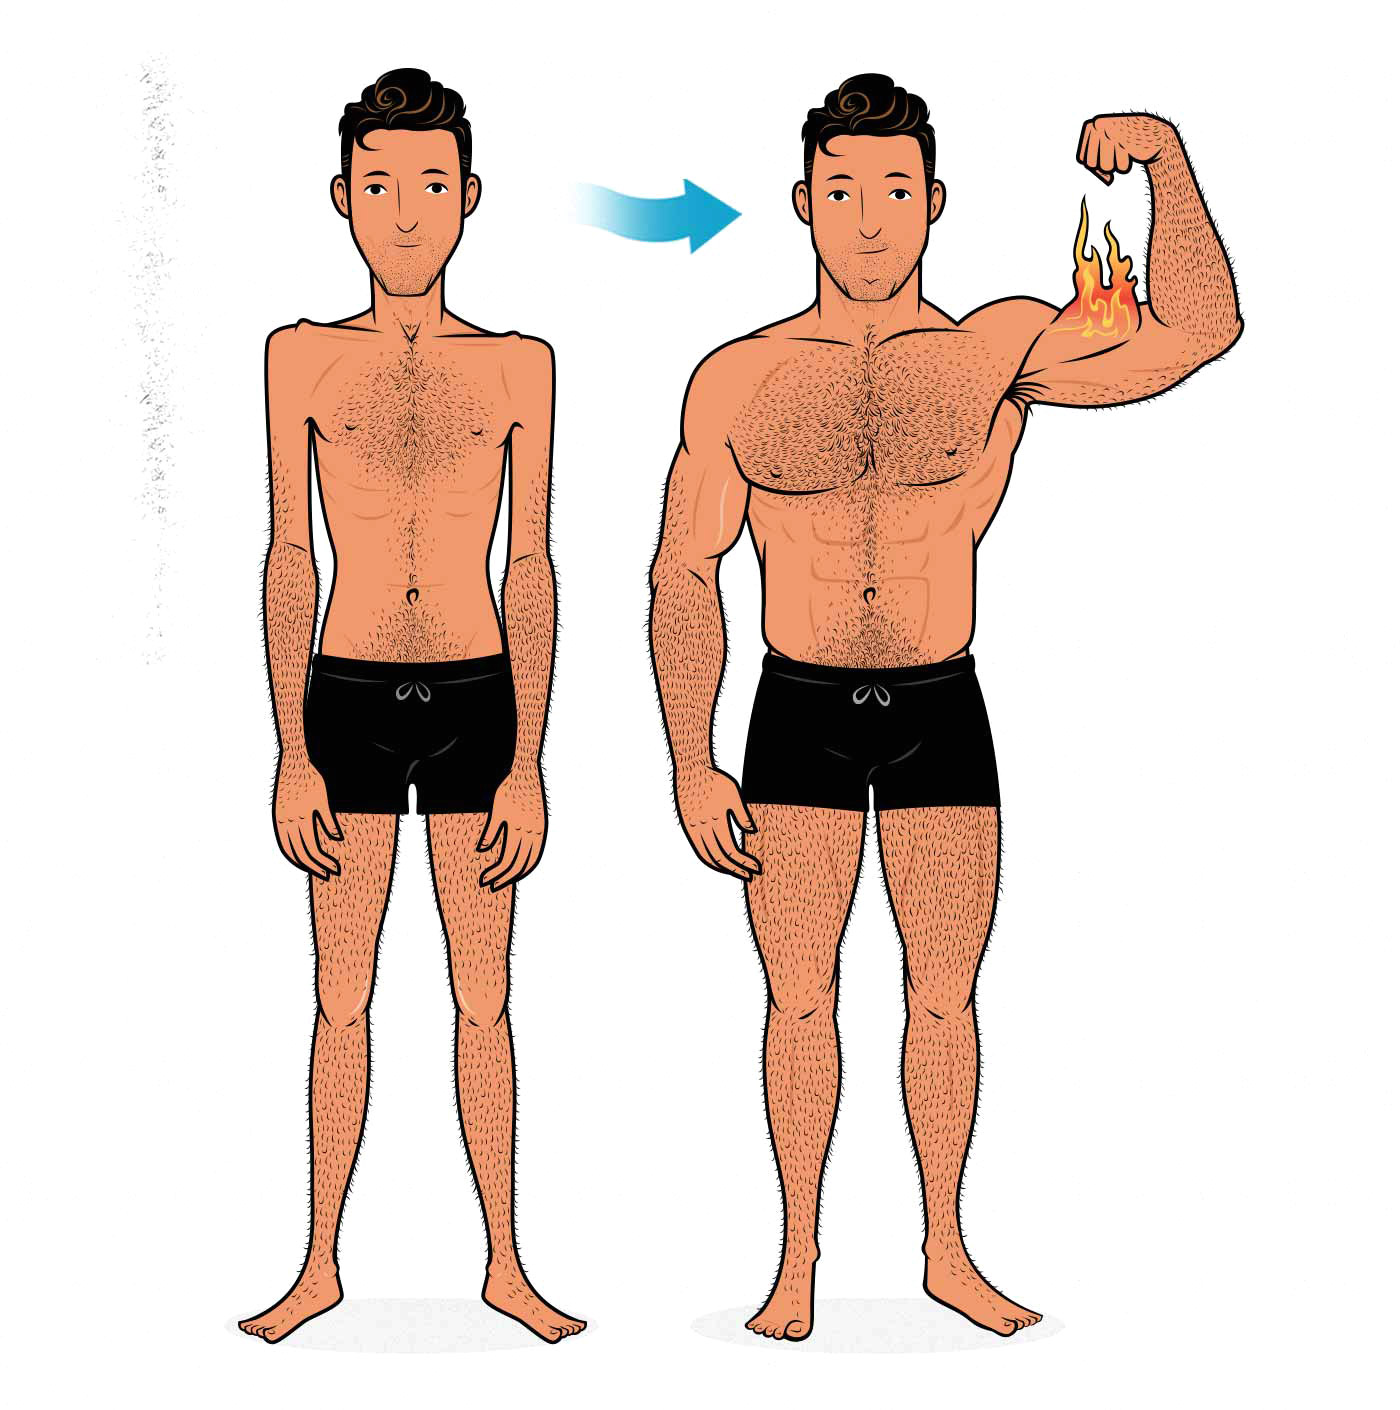 Before and after illustration of a skinny guy building muscle and becoming muscular.